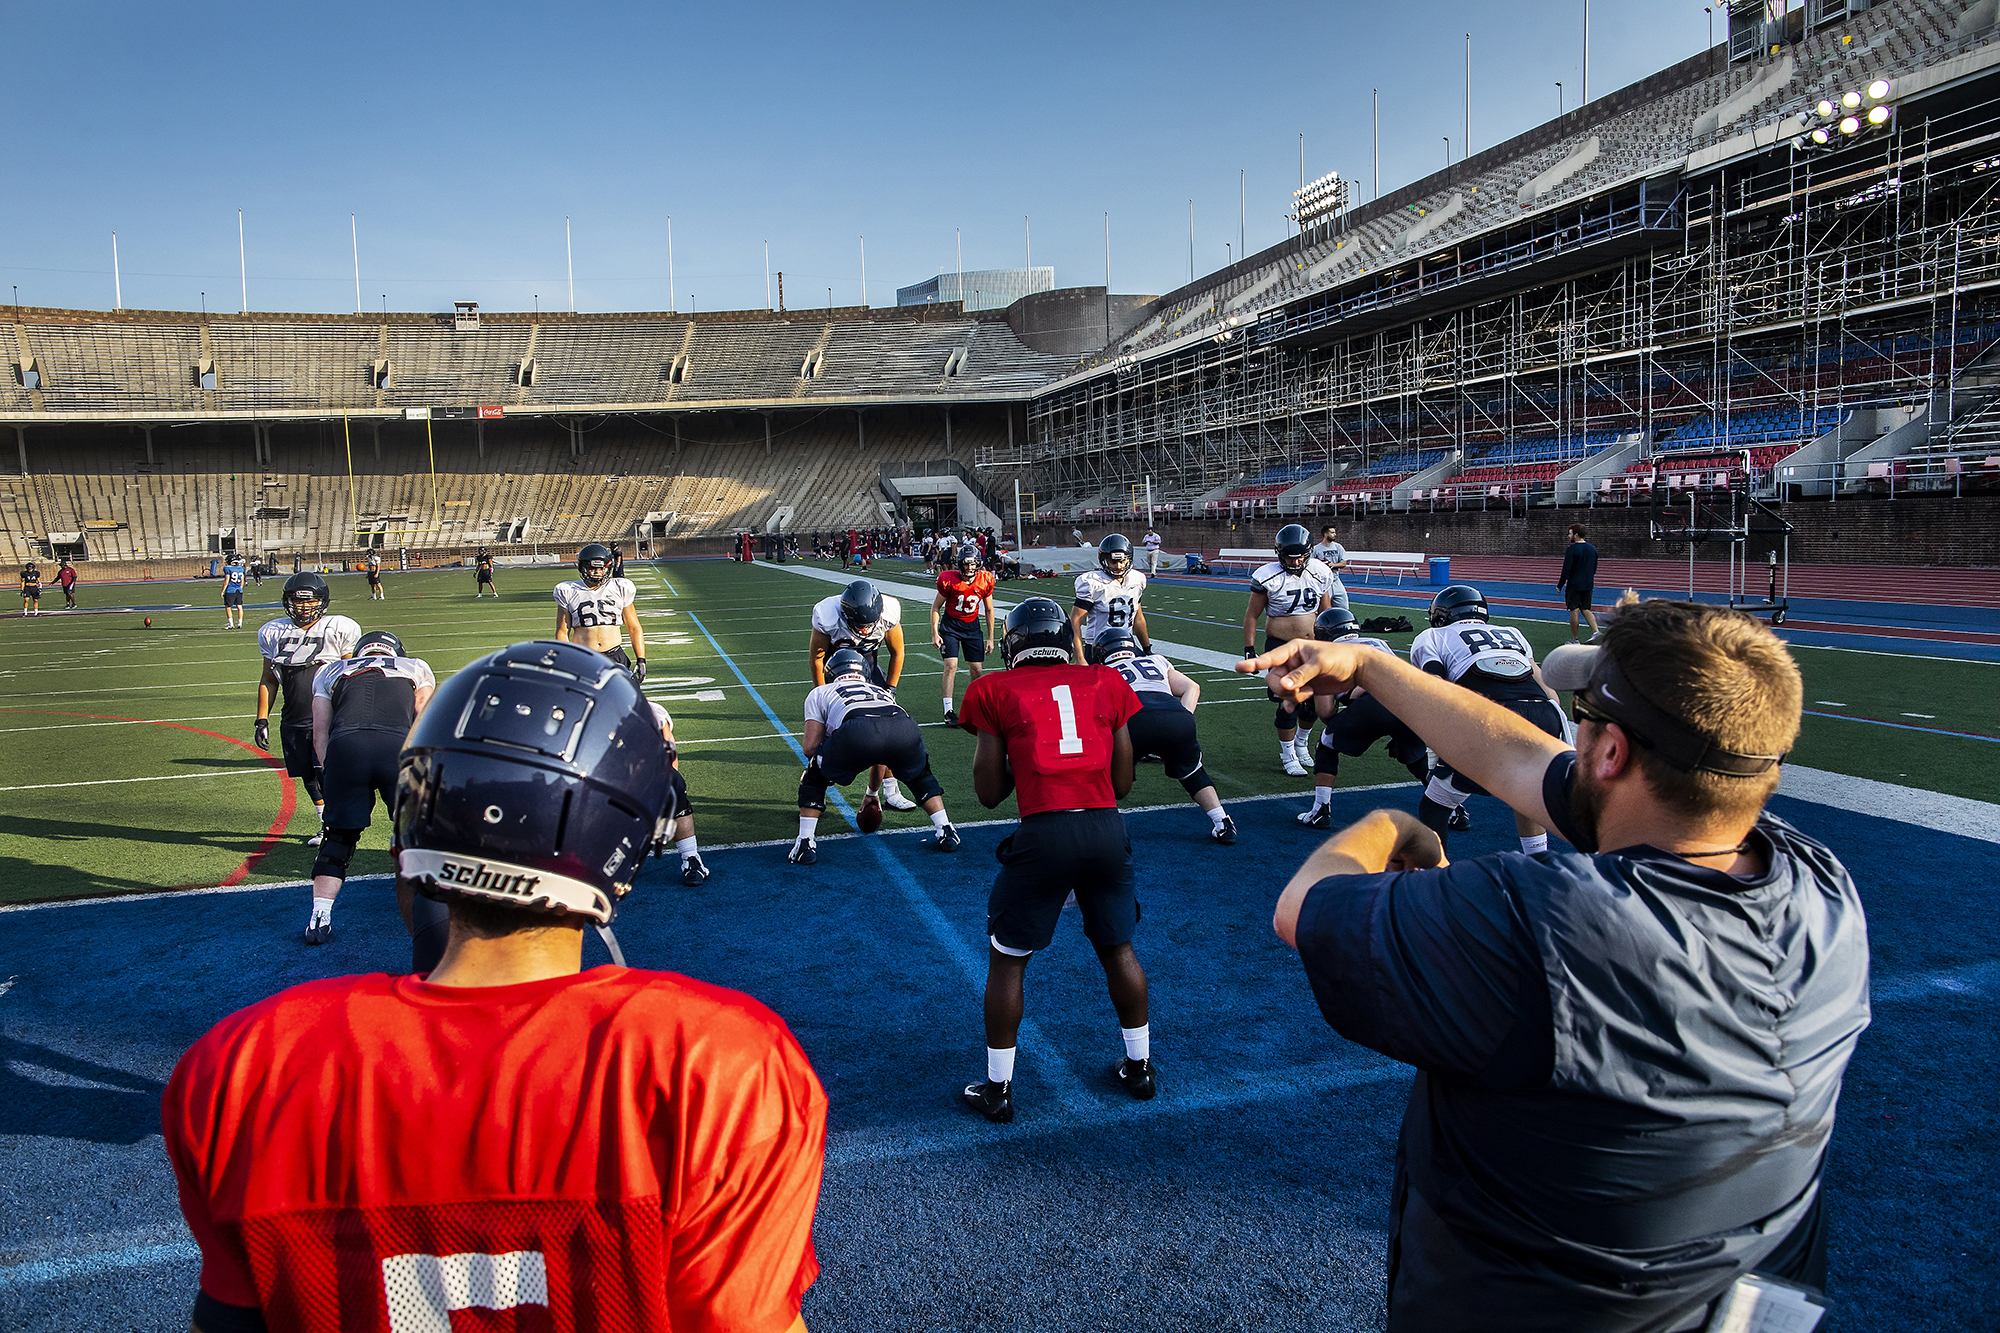 From the end zone, Penn football players practice a play from their own goal line.